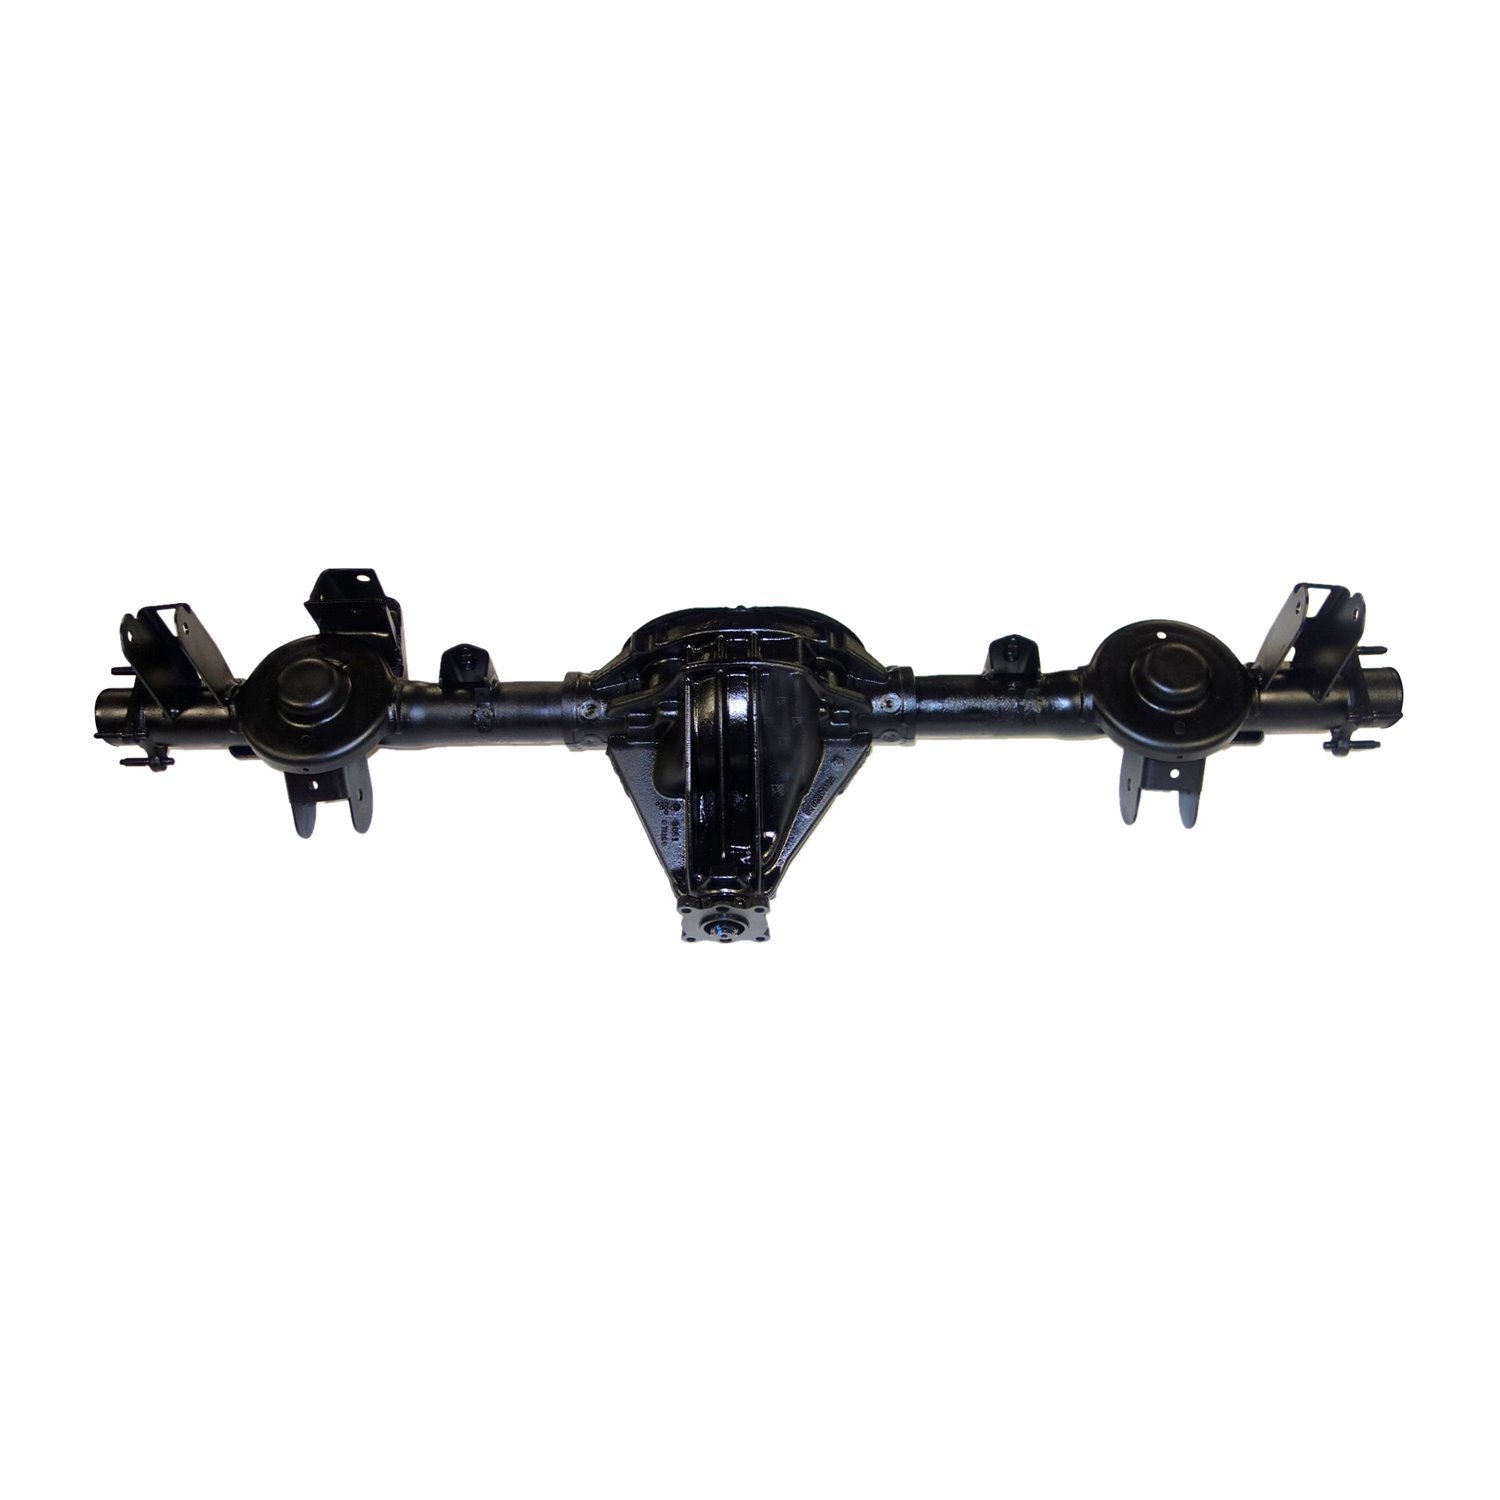 Remanufactured Axle Assy for Chy 8.25" 03-04 Liberty 3.73 , 3.7l w/o ABS, CV Driveshaft